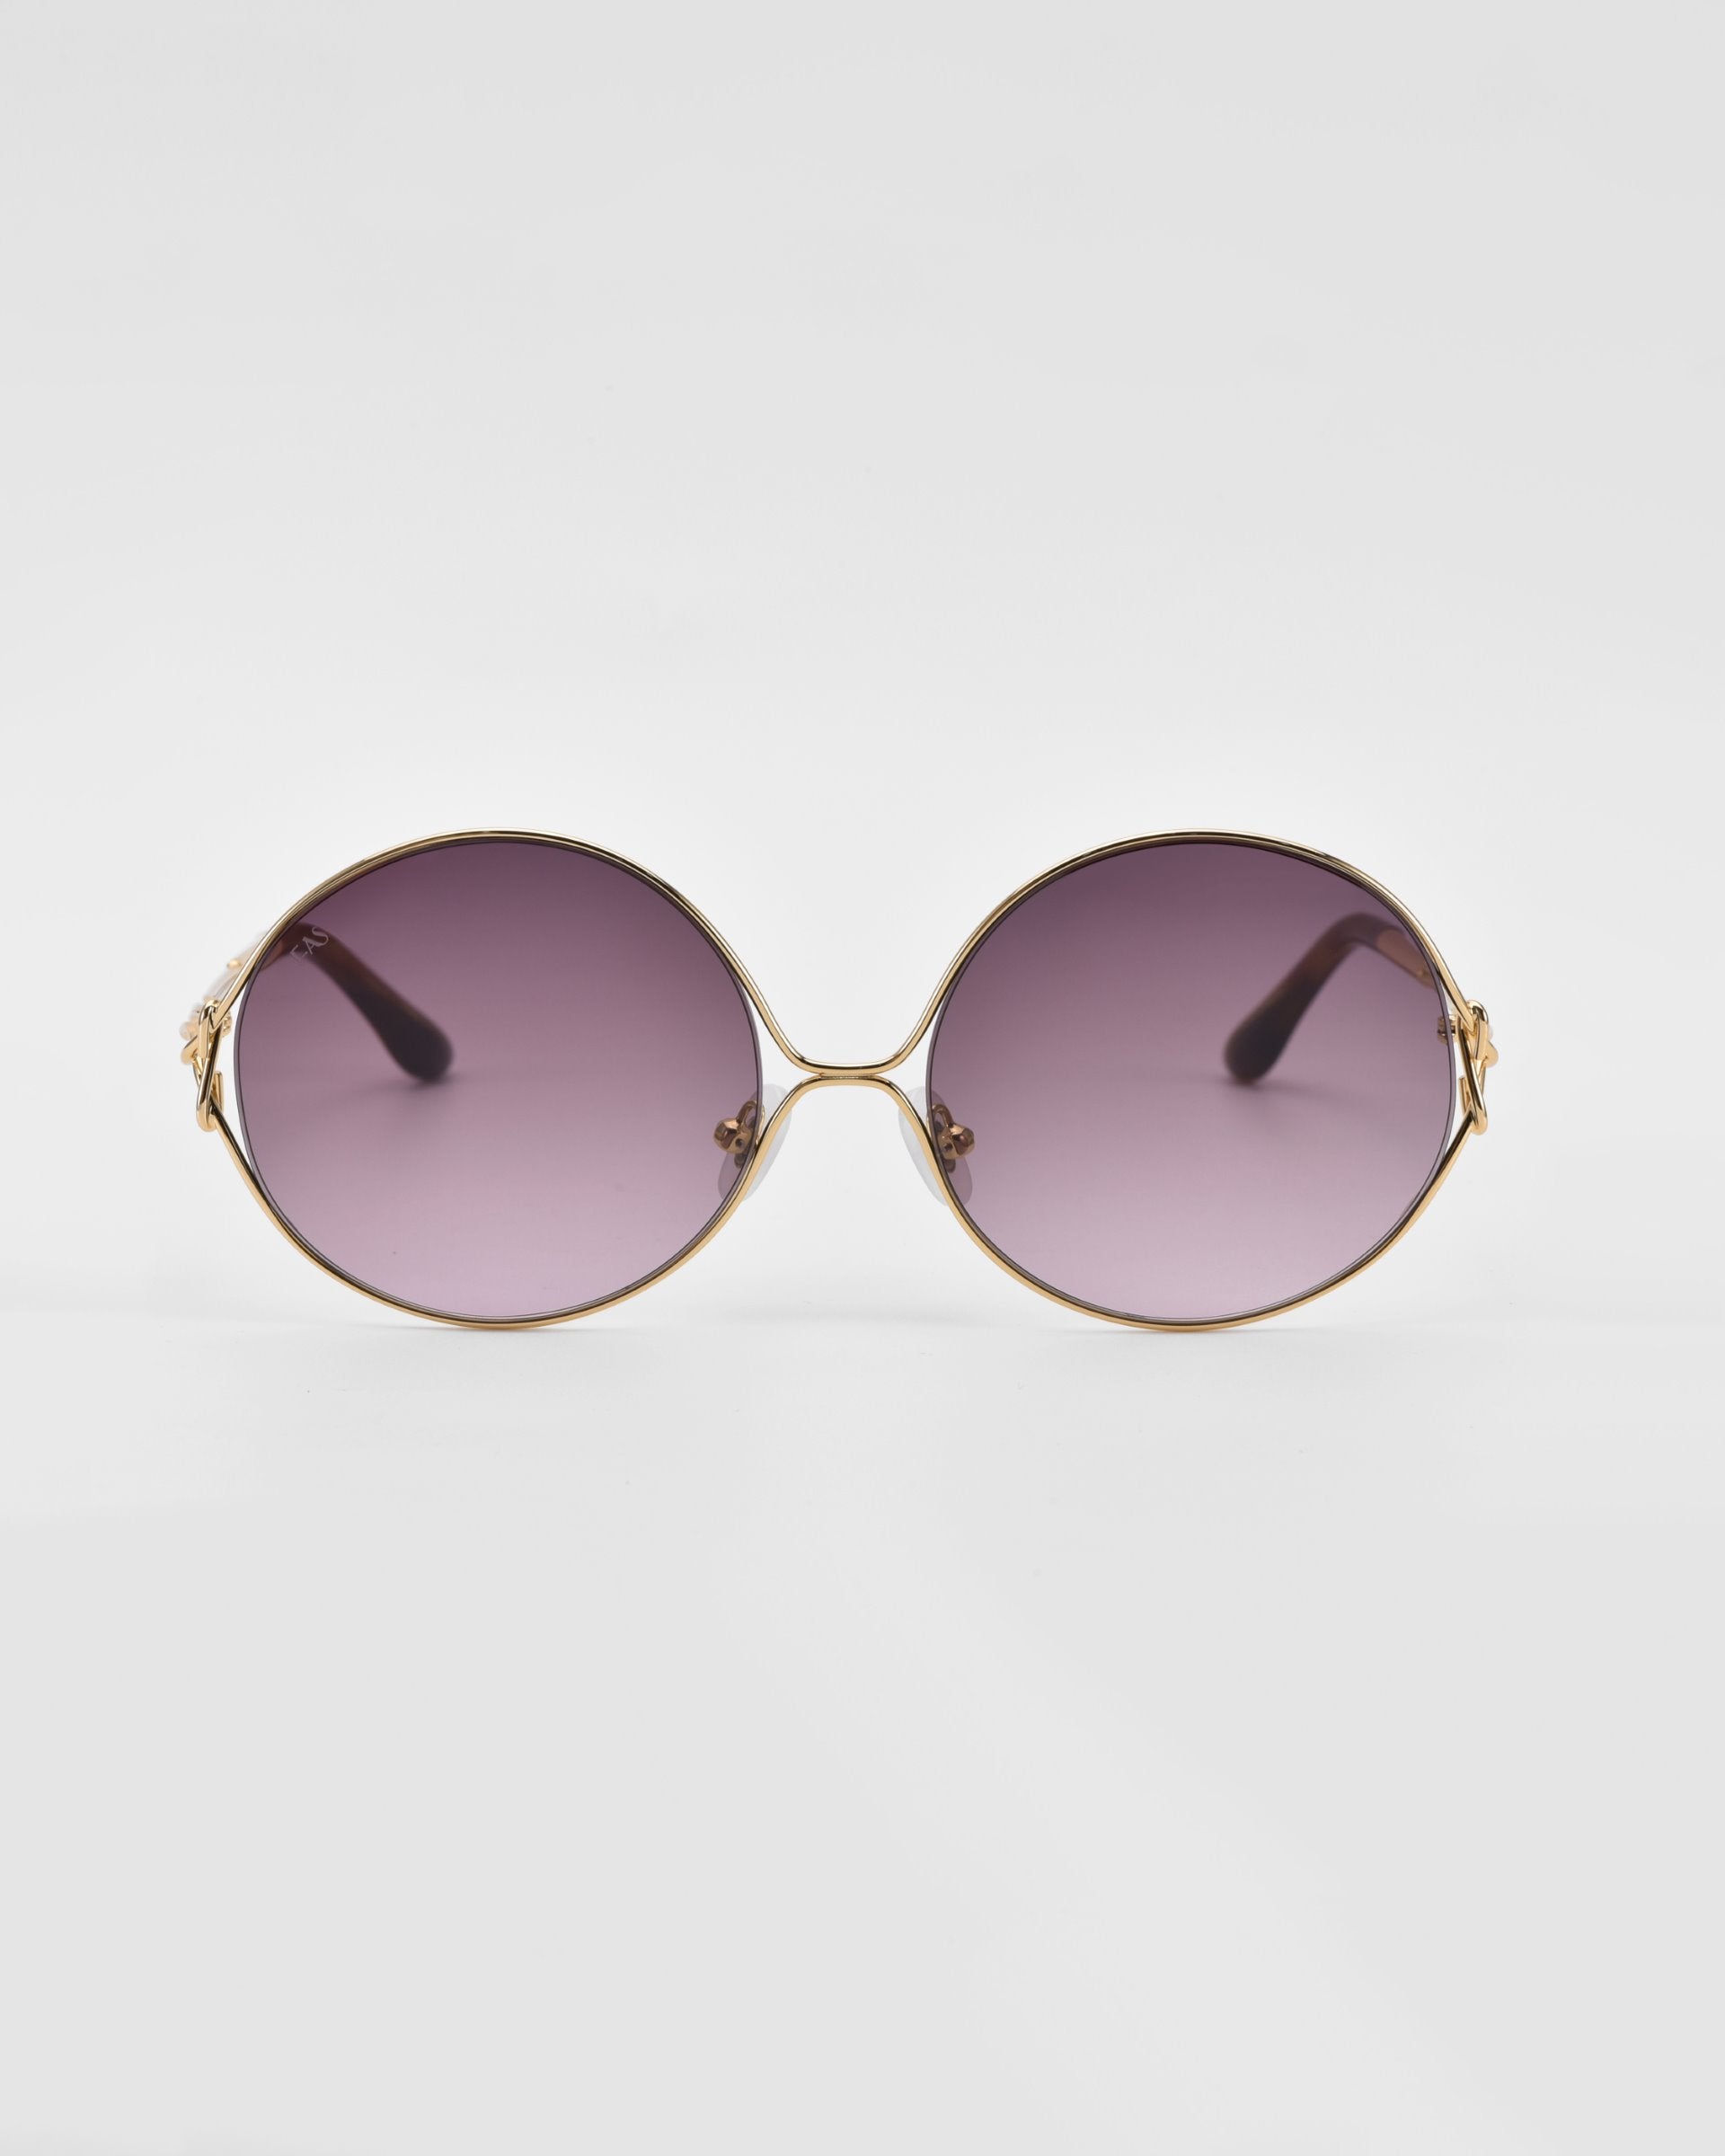 A pair of stylish, retro-inspired For Art&#39;s Sake® Aura sunglasses with oversized round gold frames and dark, gradient purple lenses. The edges of the frames feature decorative gold accents. The background is plain white.